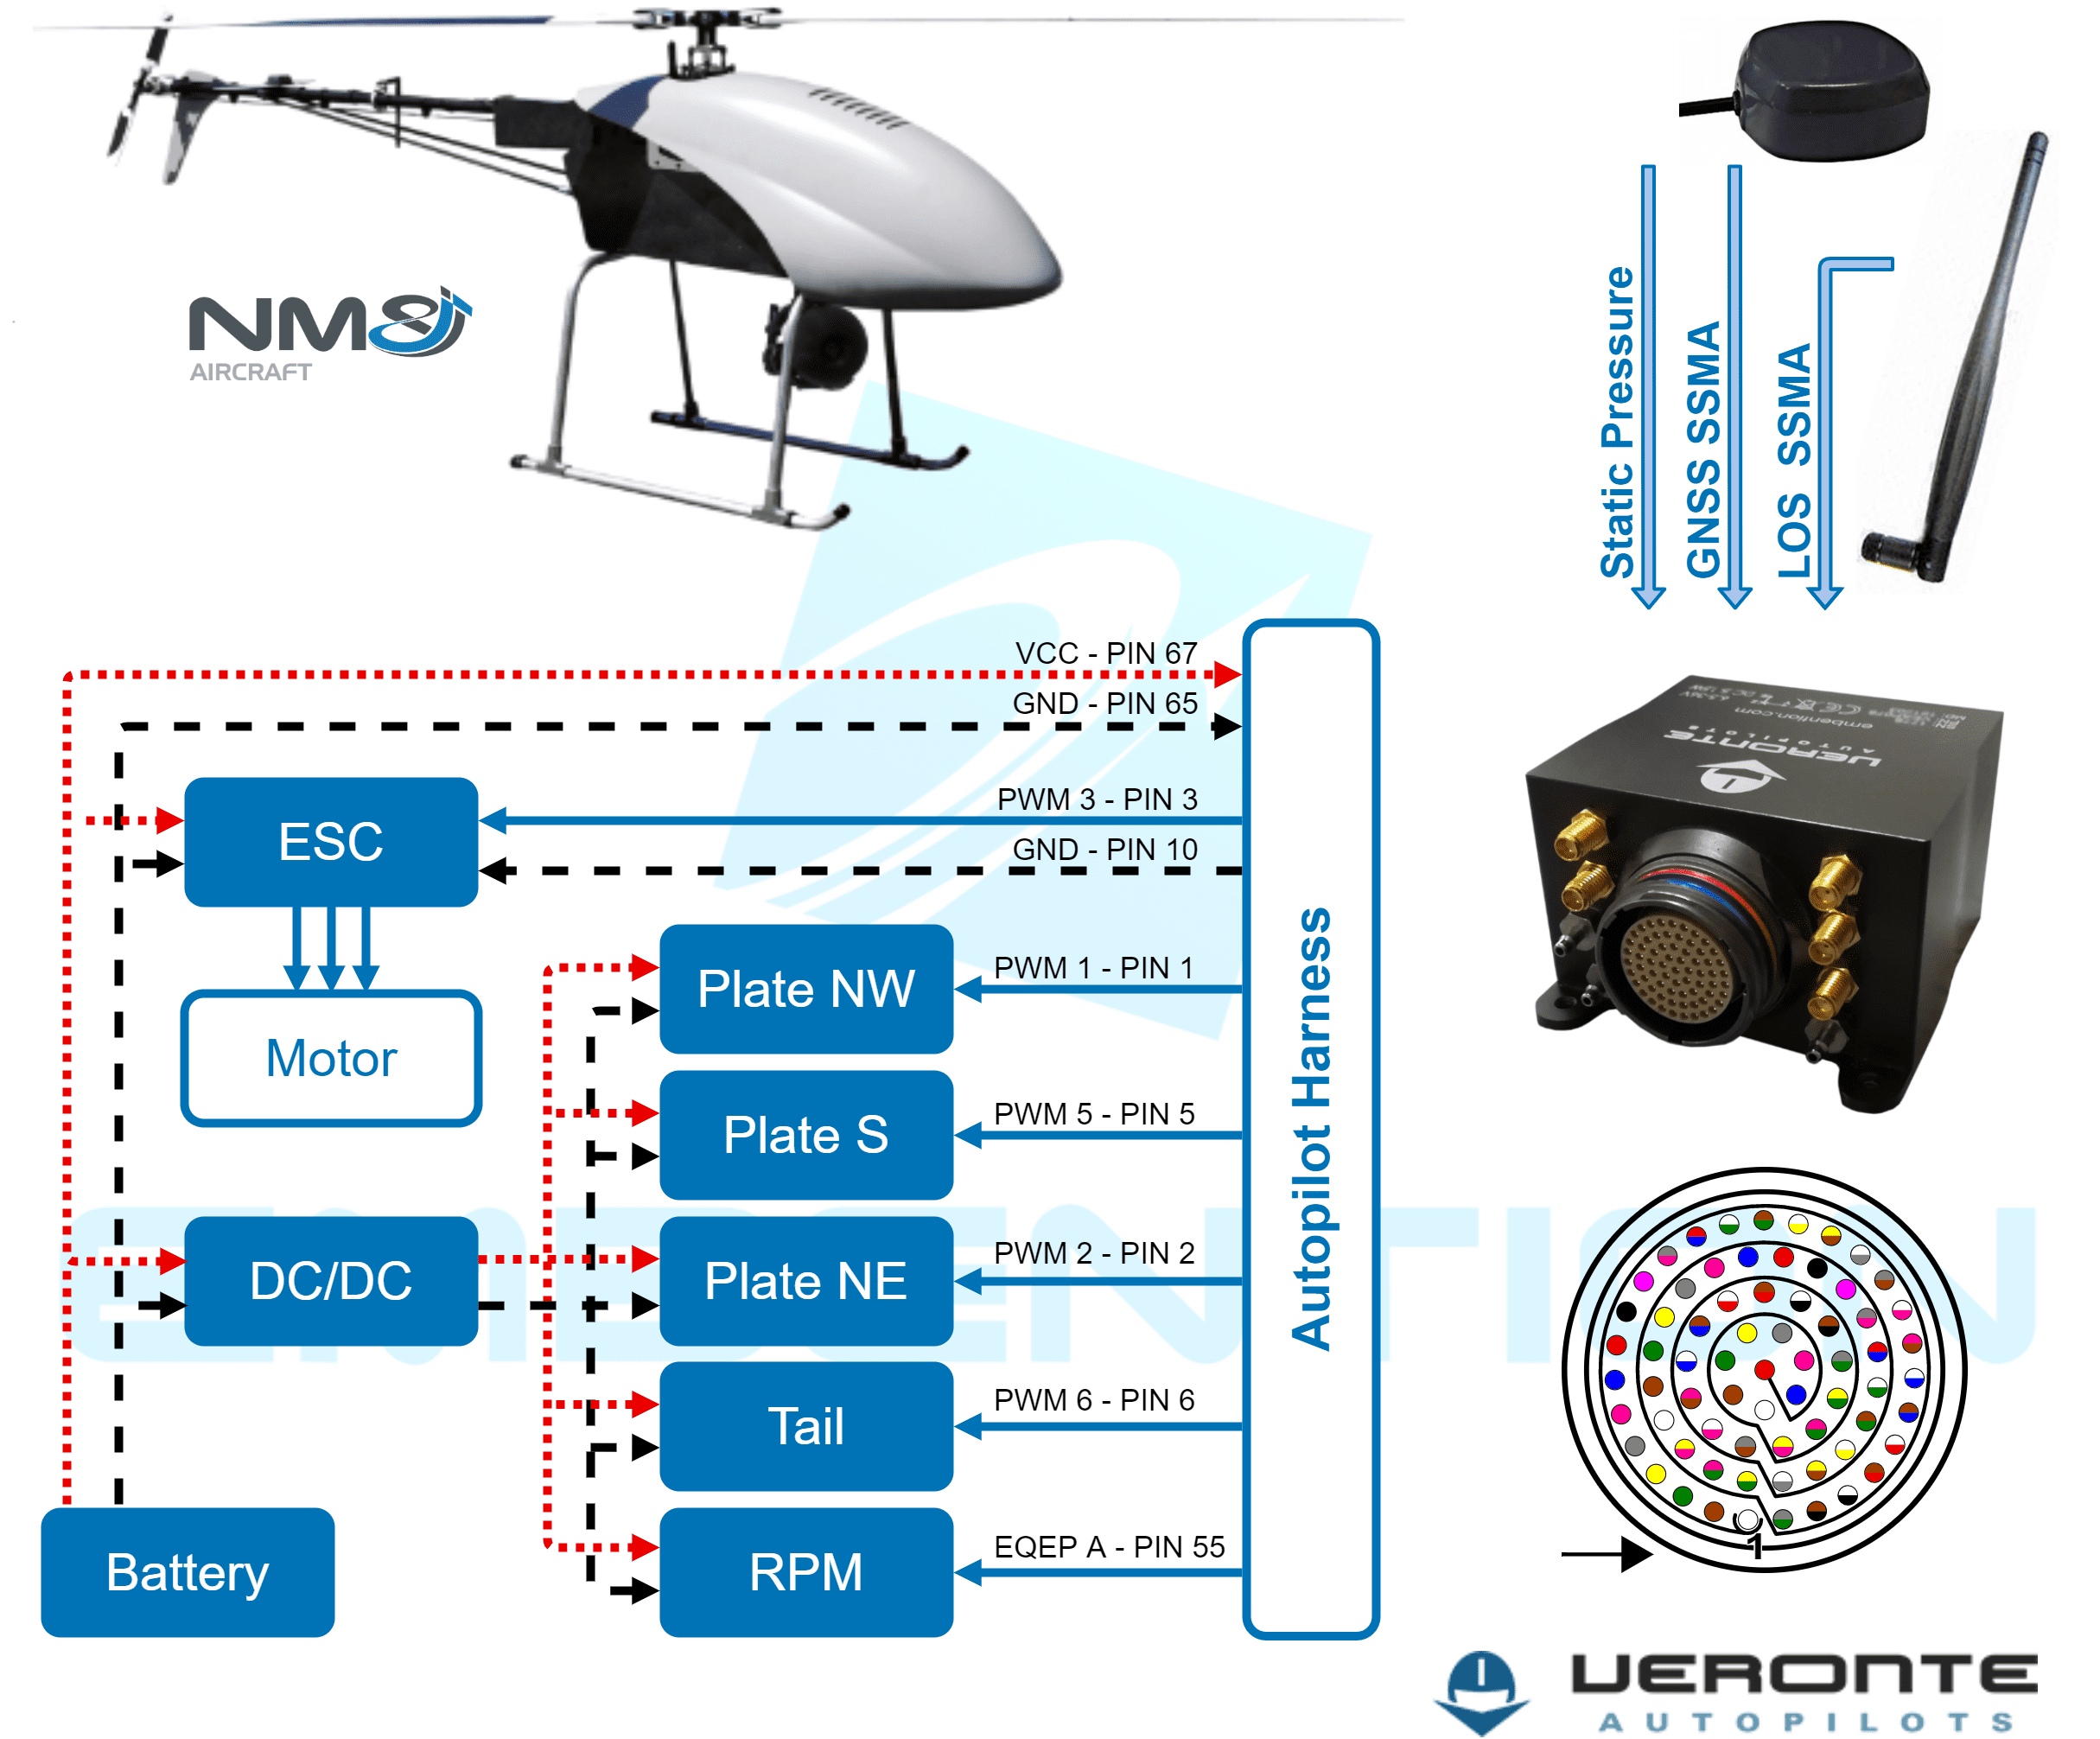 Annex 2: Connection examples - Helicopter to Veronte Autopilot